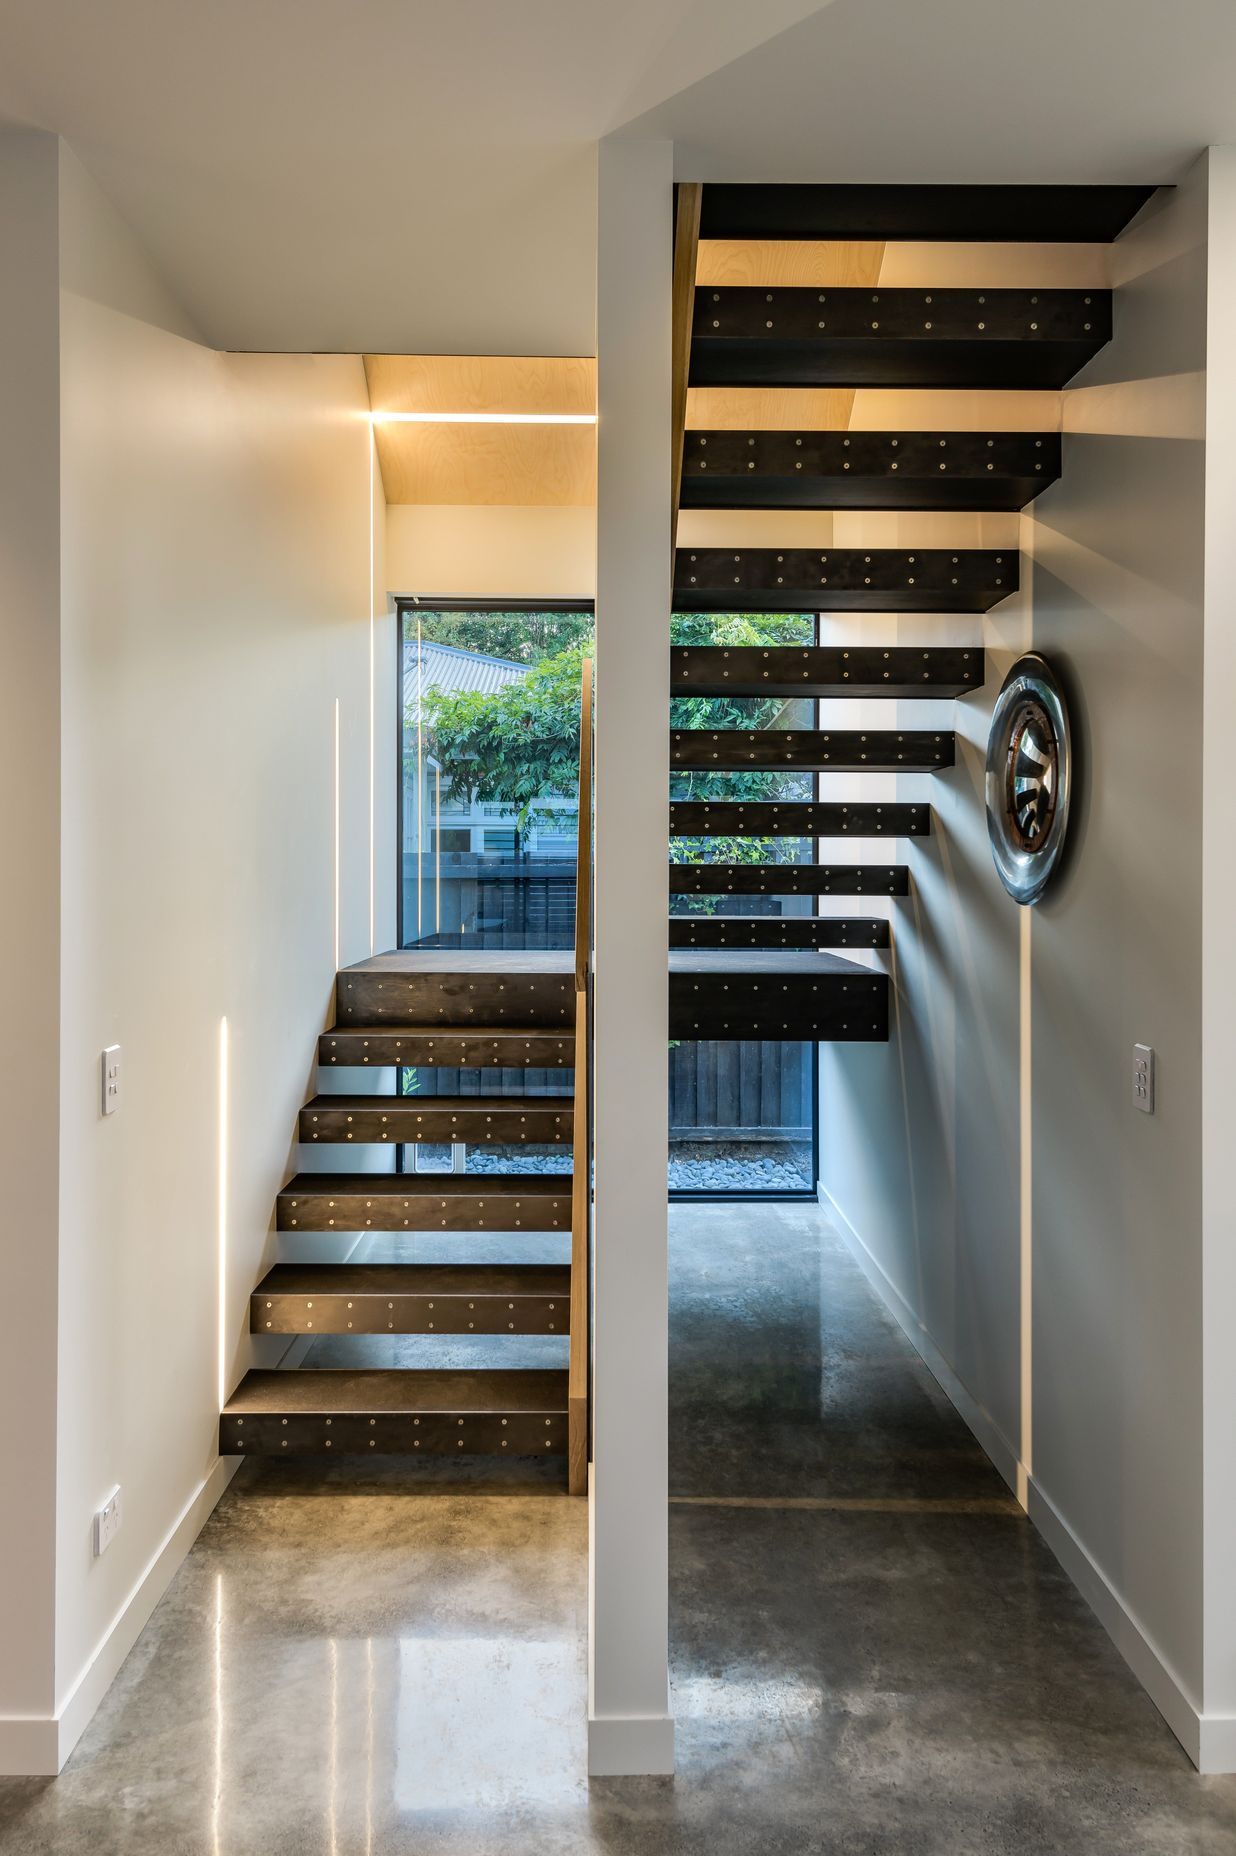 The staircase has an exposed metal stringer, with rubber-clad treads and mild steel fronts.